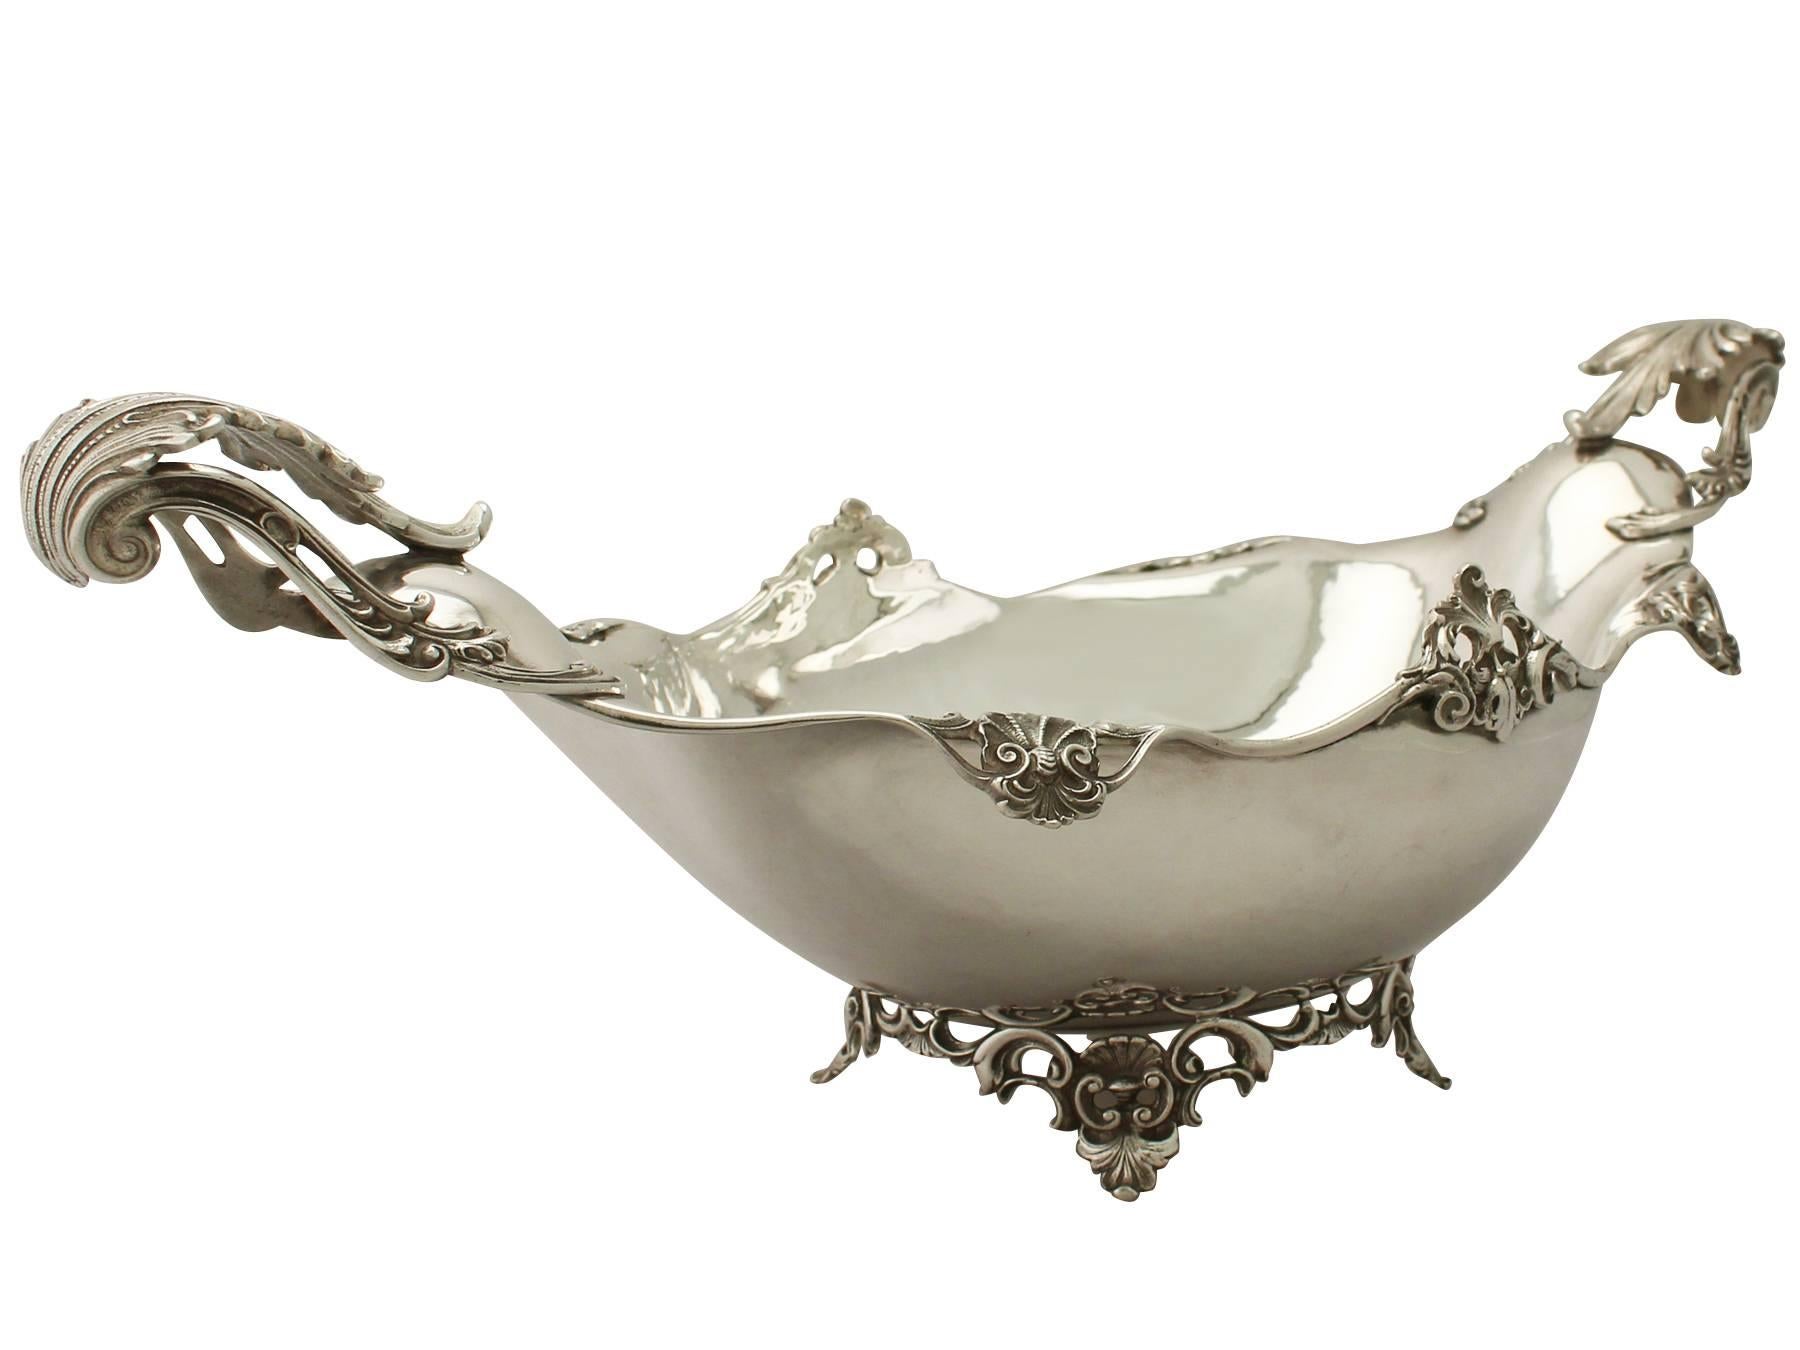 A fine and impressive, large vintage Italian 800 standard silver presentation bowl/centerpiece: An addition to our dining silverware collection.

This exceptional vintage Italian silver bowl has an oval, galleon boat shaped form.

The surface of